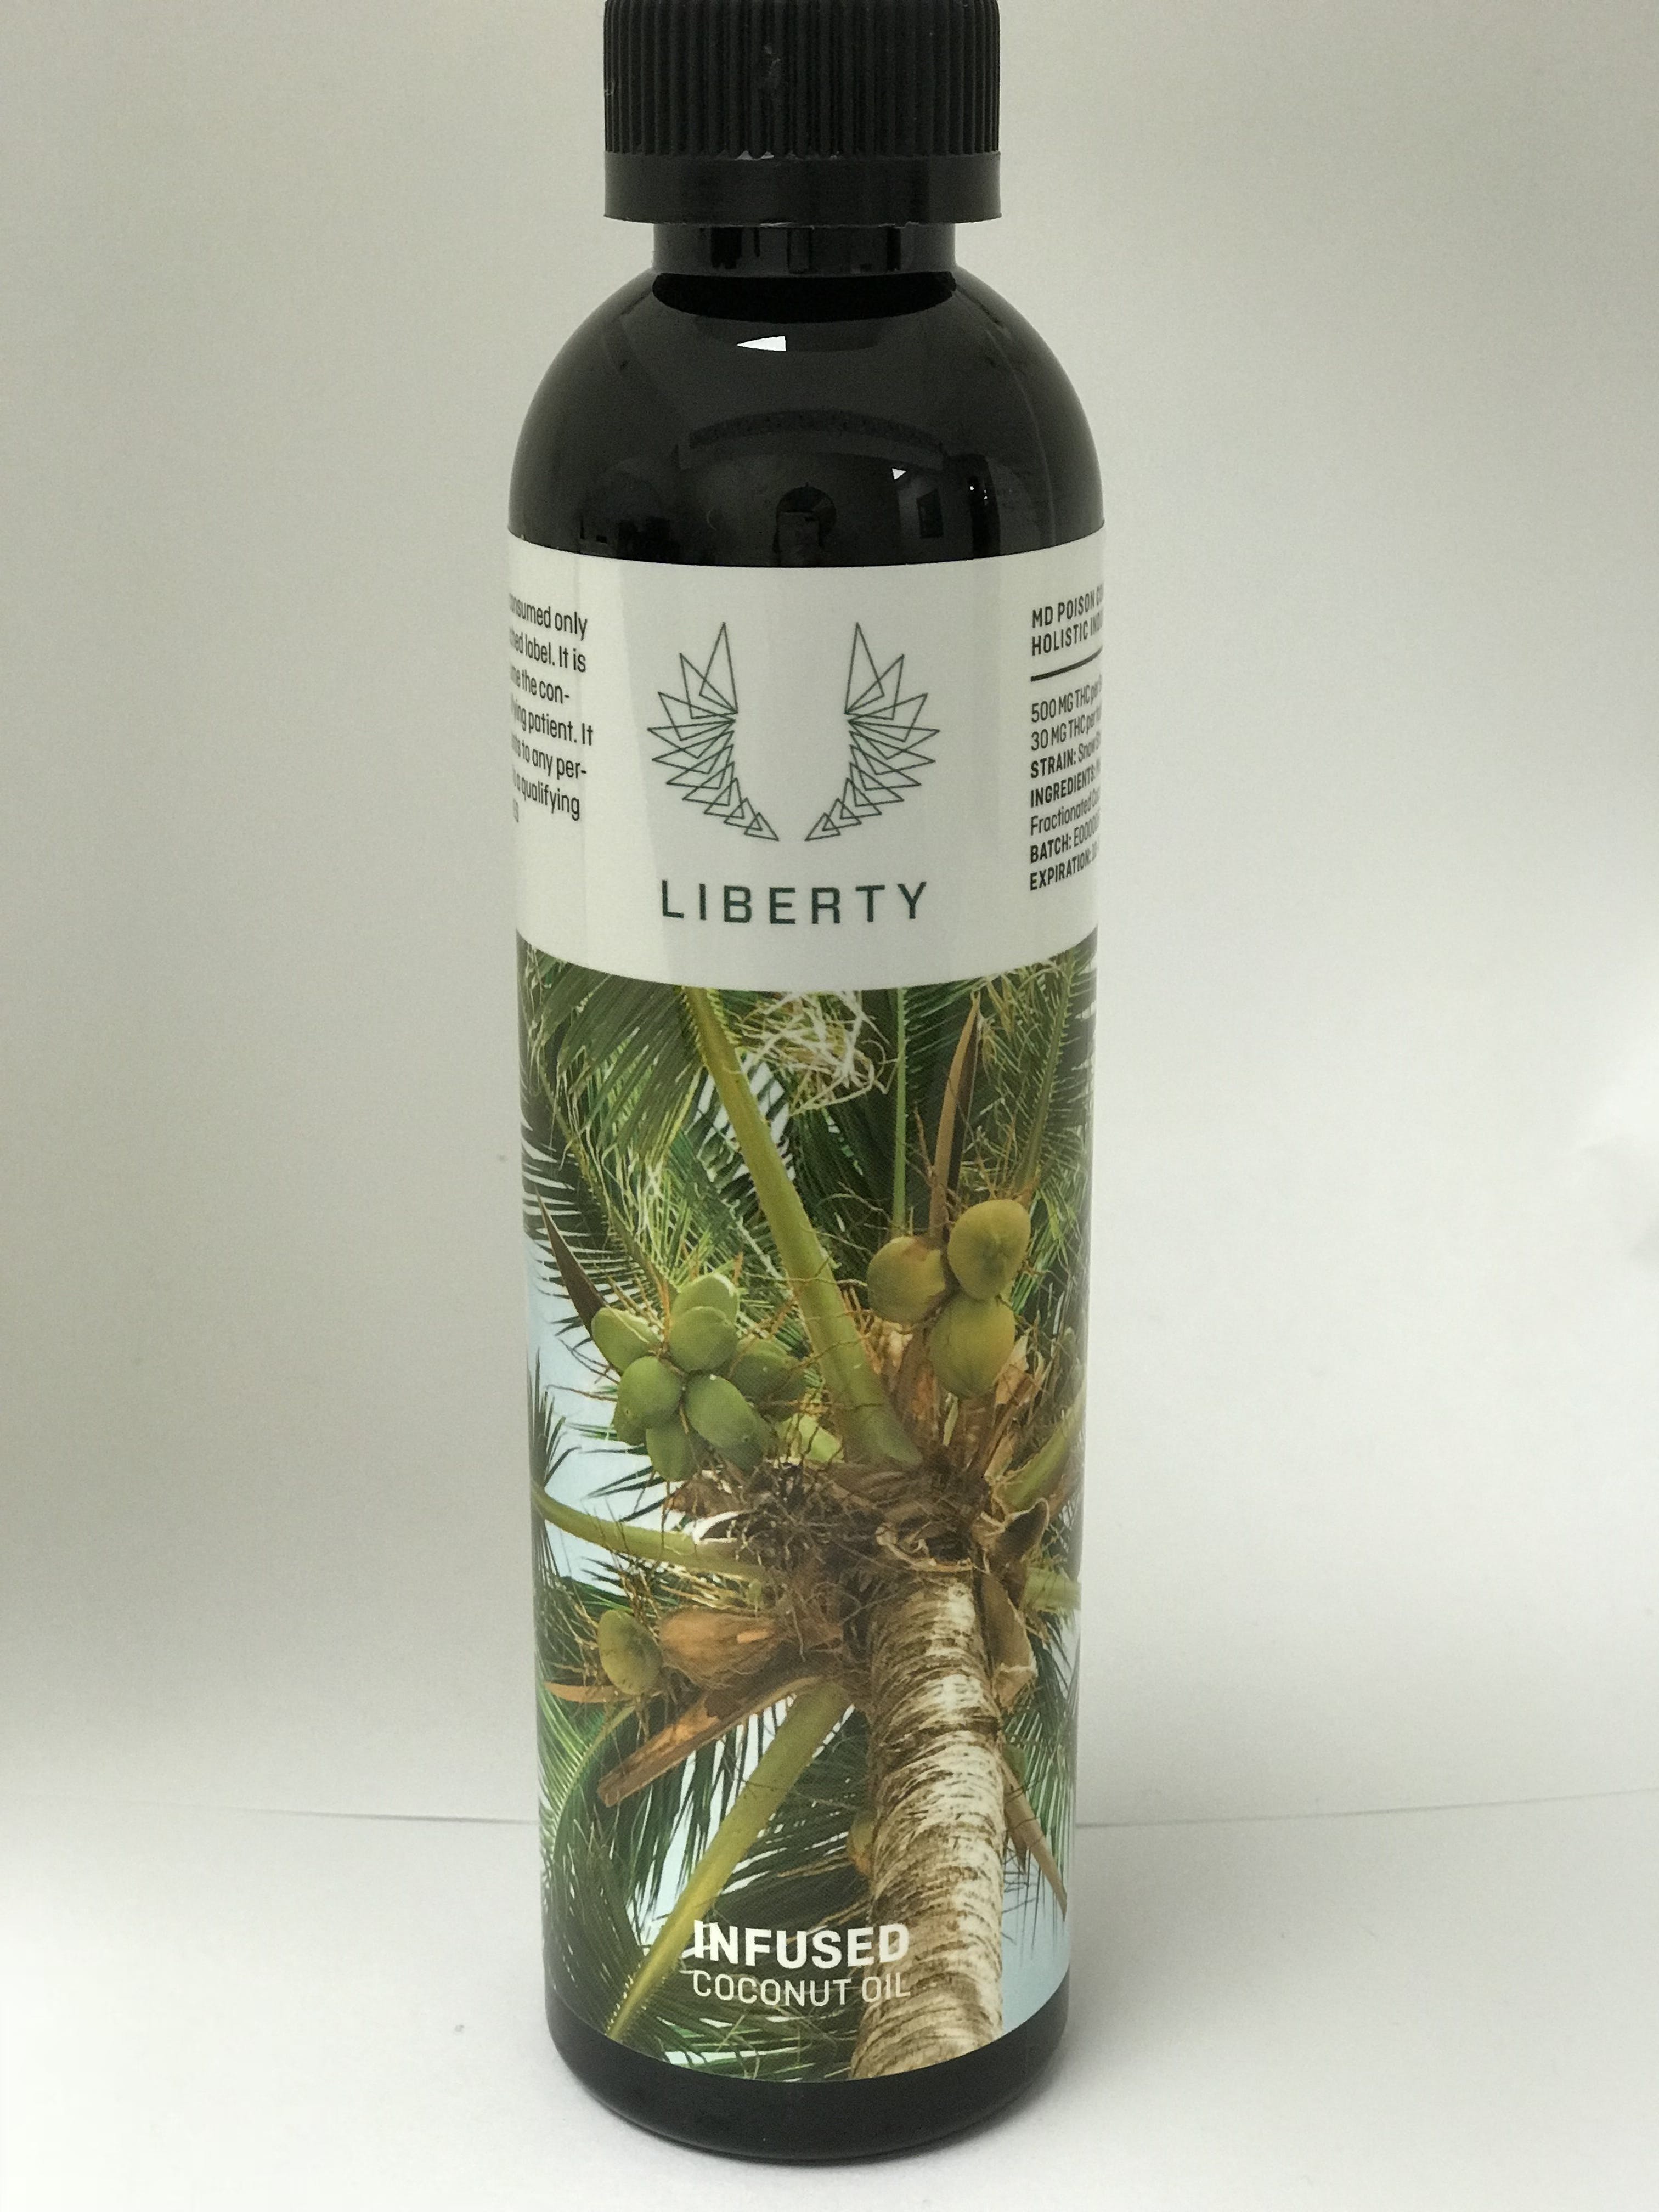 edible-infused-coconut-oil-liberty-500mg-thc